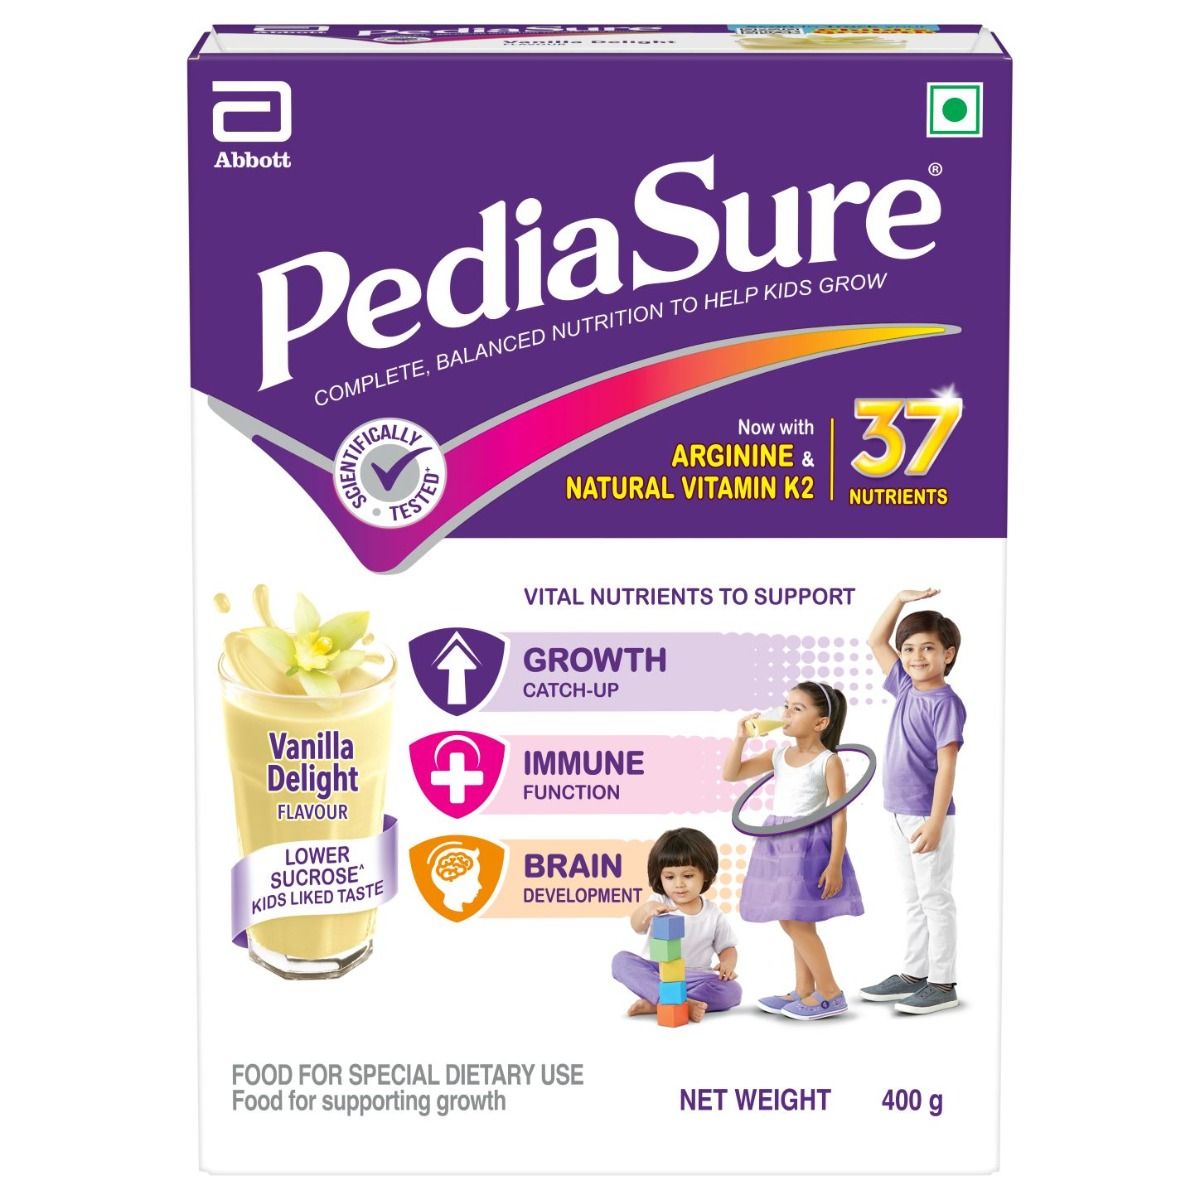 Pediasure Vanilla Delight Flavoured Kids Nutrition Drink, 400 gm Refill Pack, Pack of 1 